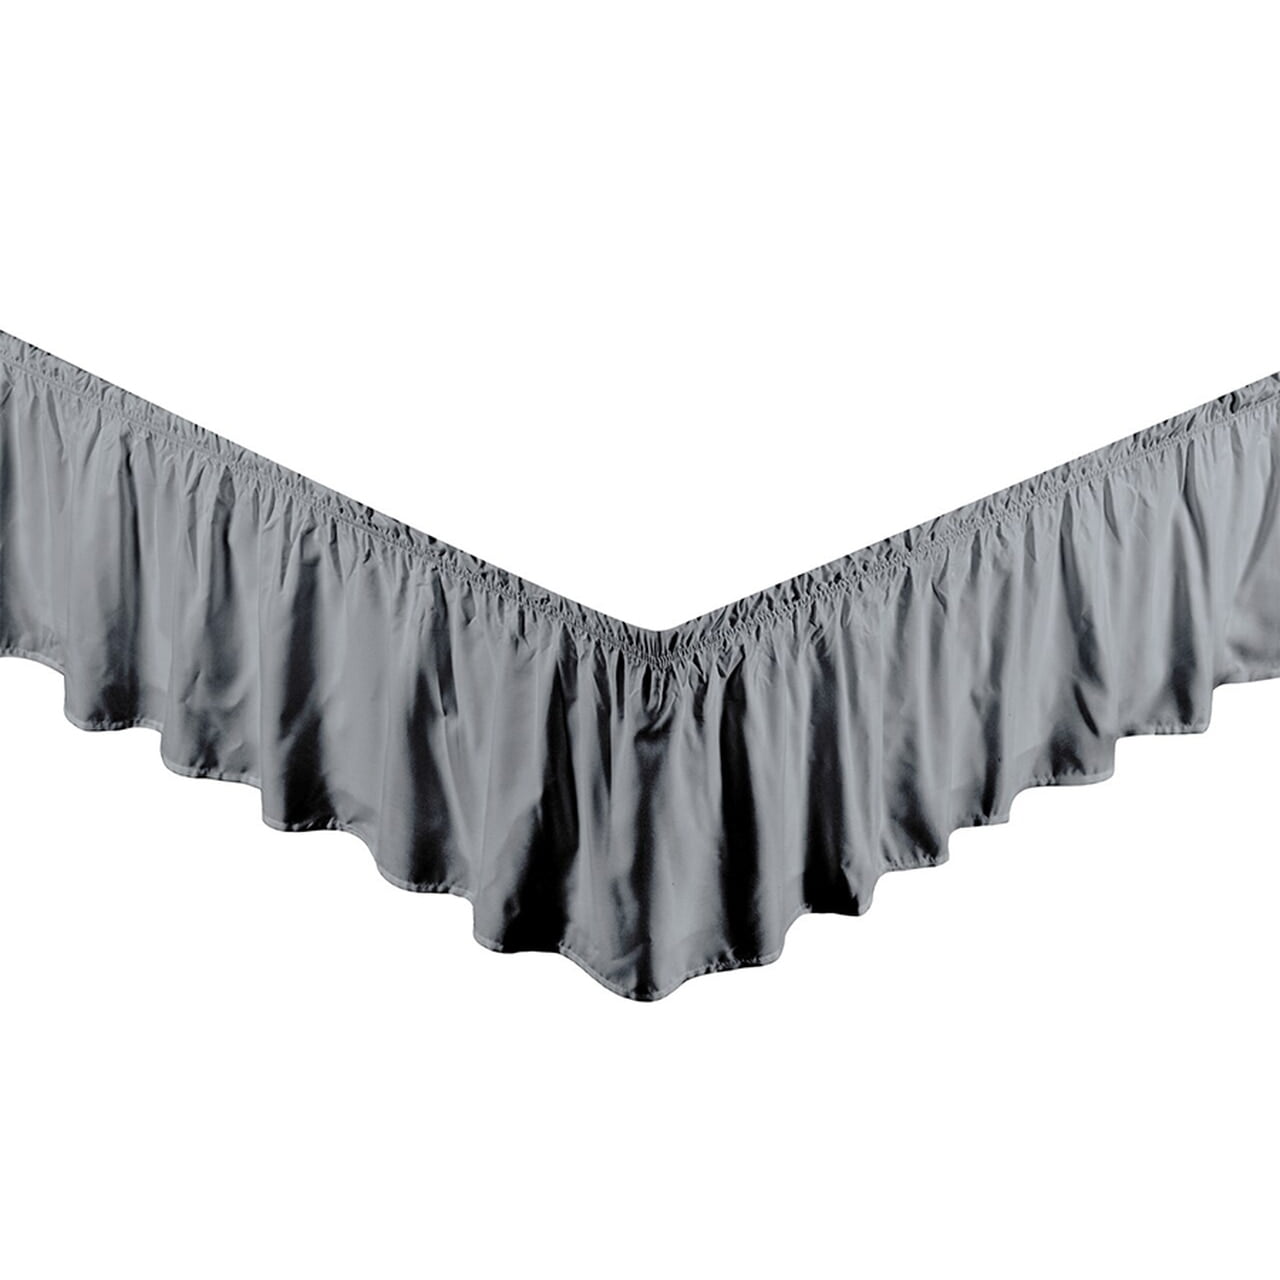 Dark Grey/Charcoal, Full Hotel Collection Bedskirt Bed Ruffle Solid Pleated Brushed Soft Microfiber Fabric Top 14 Drop New